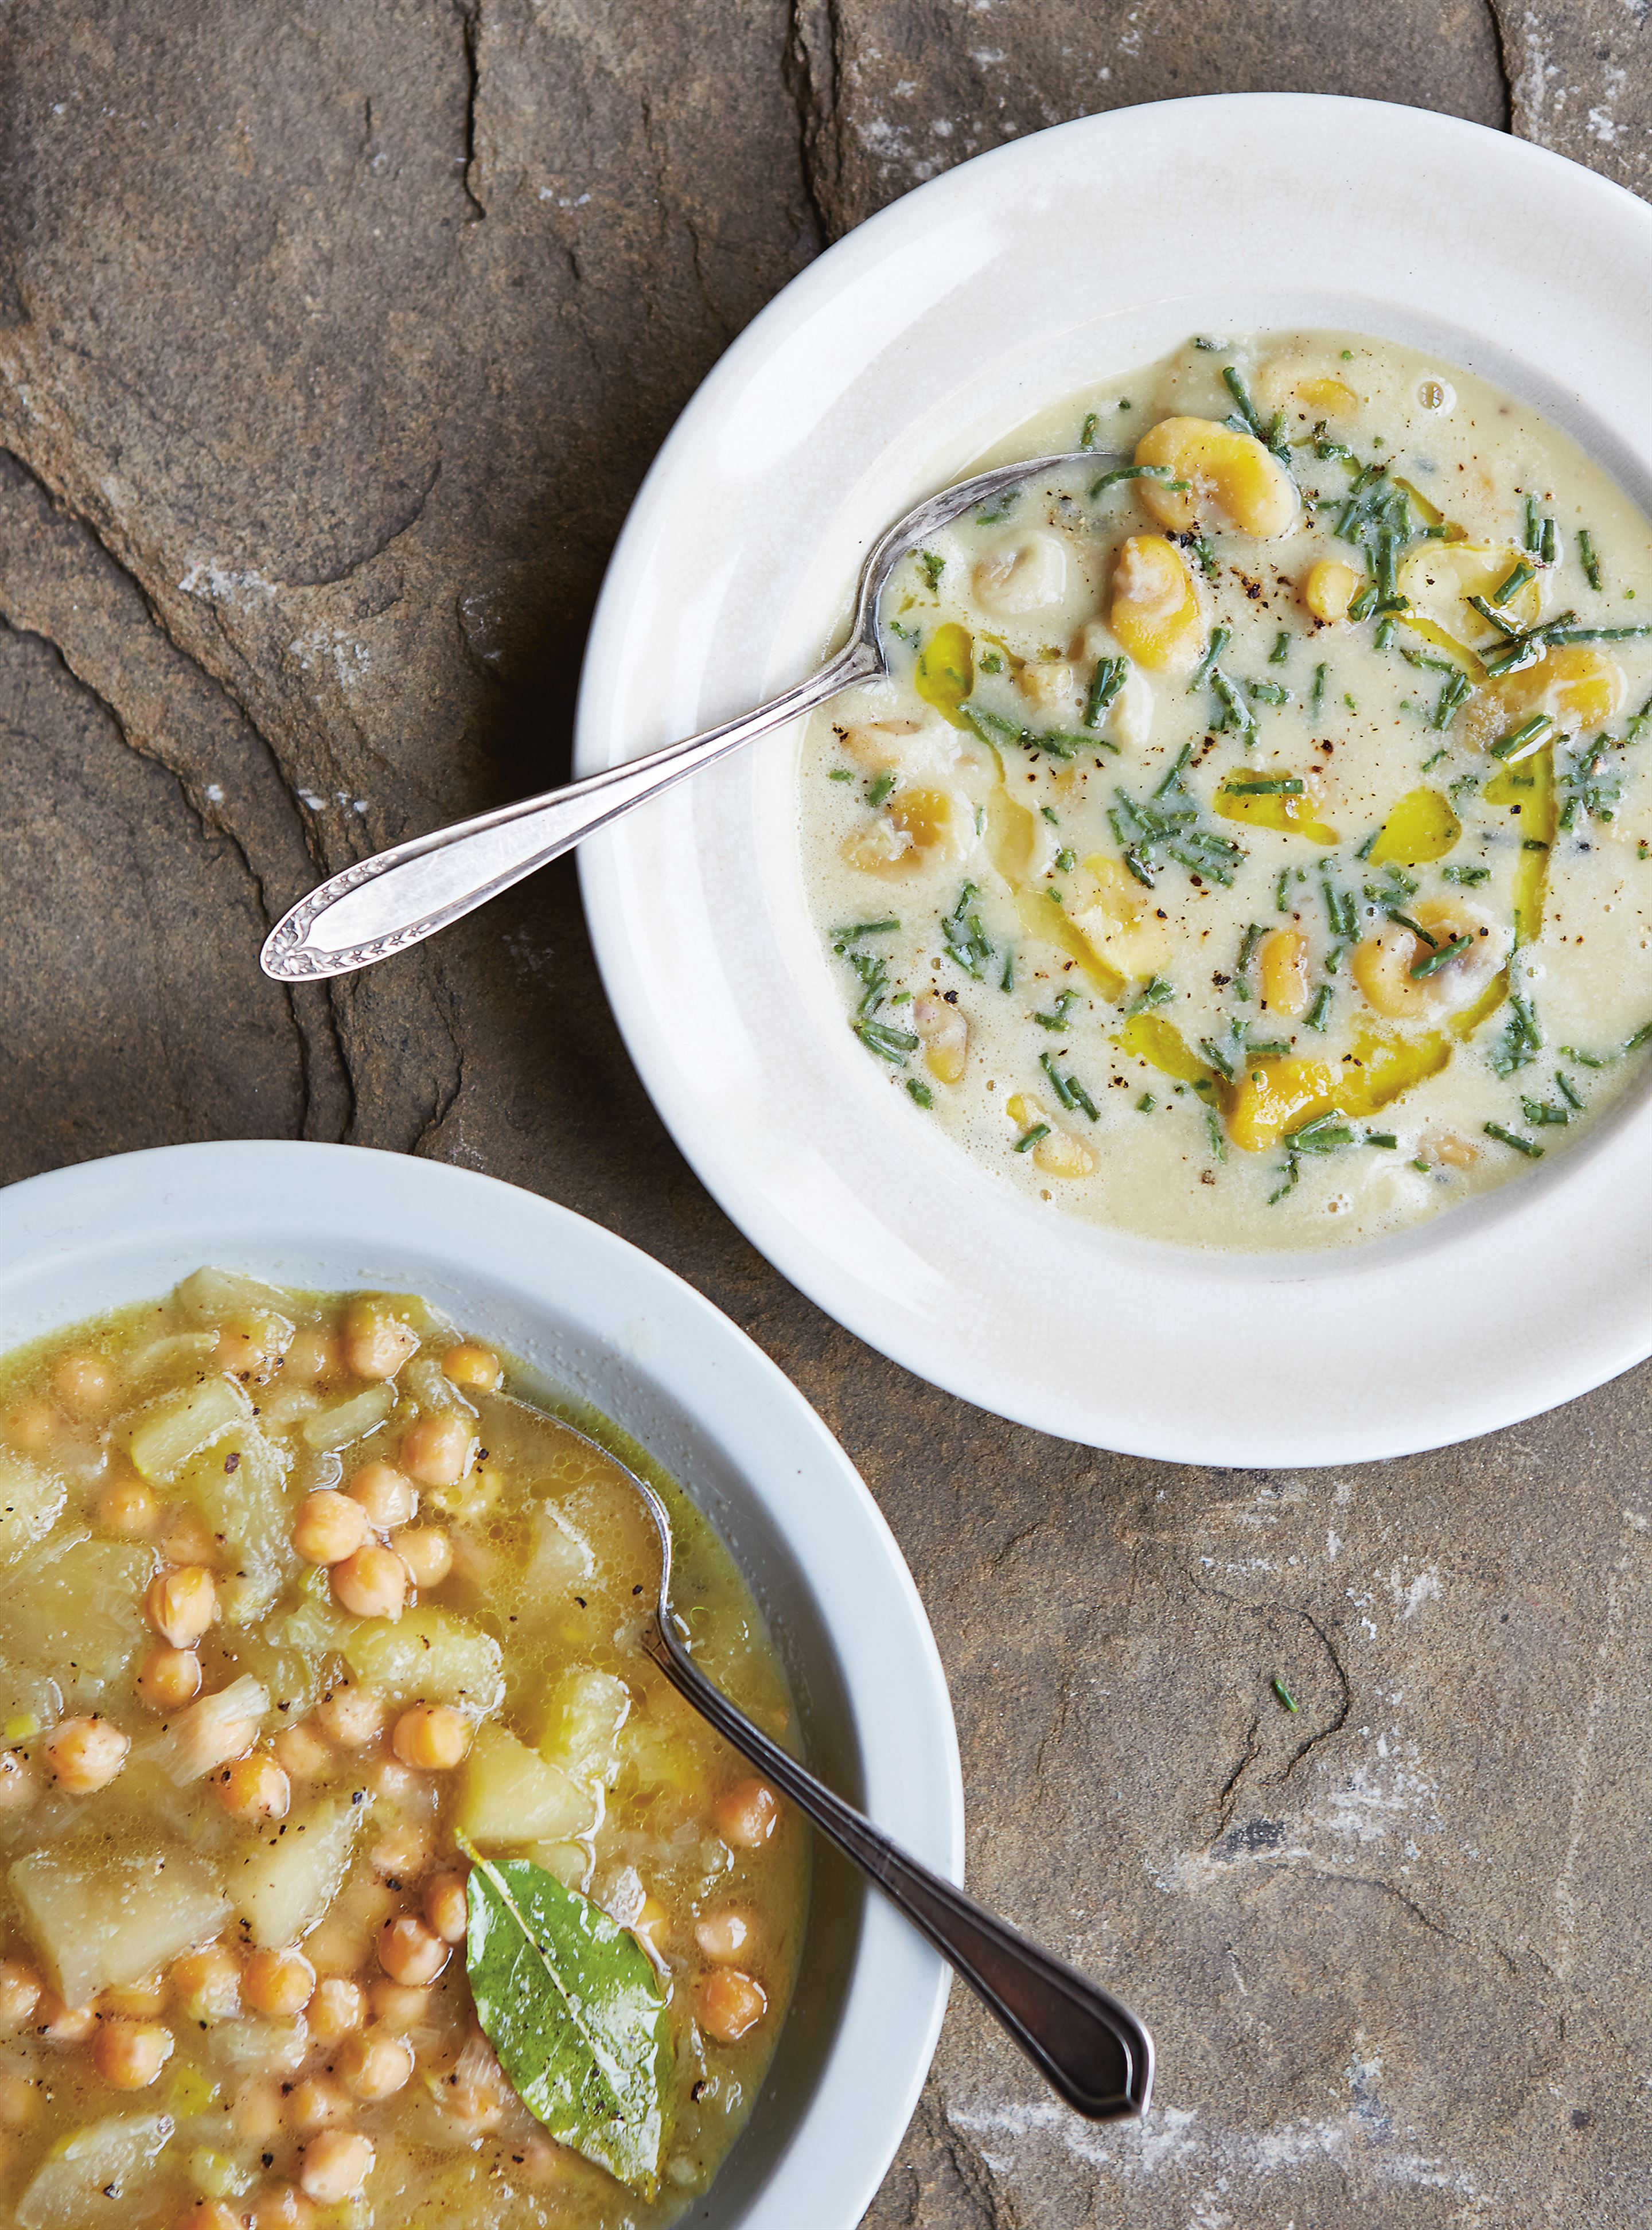 Broad bean & fennel seed soup